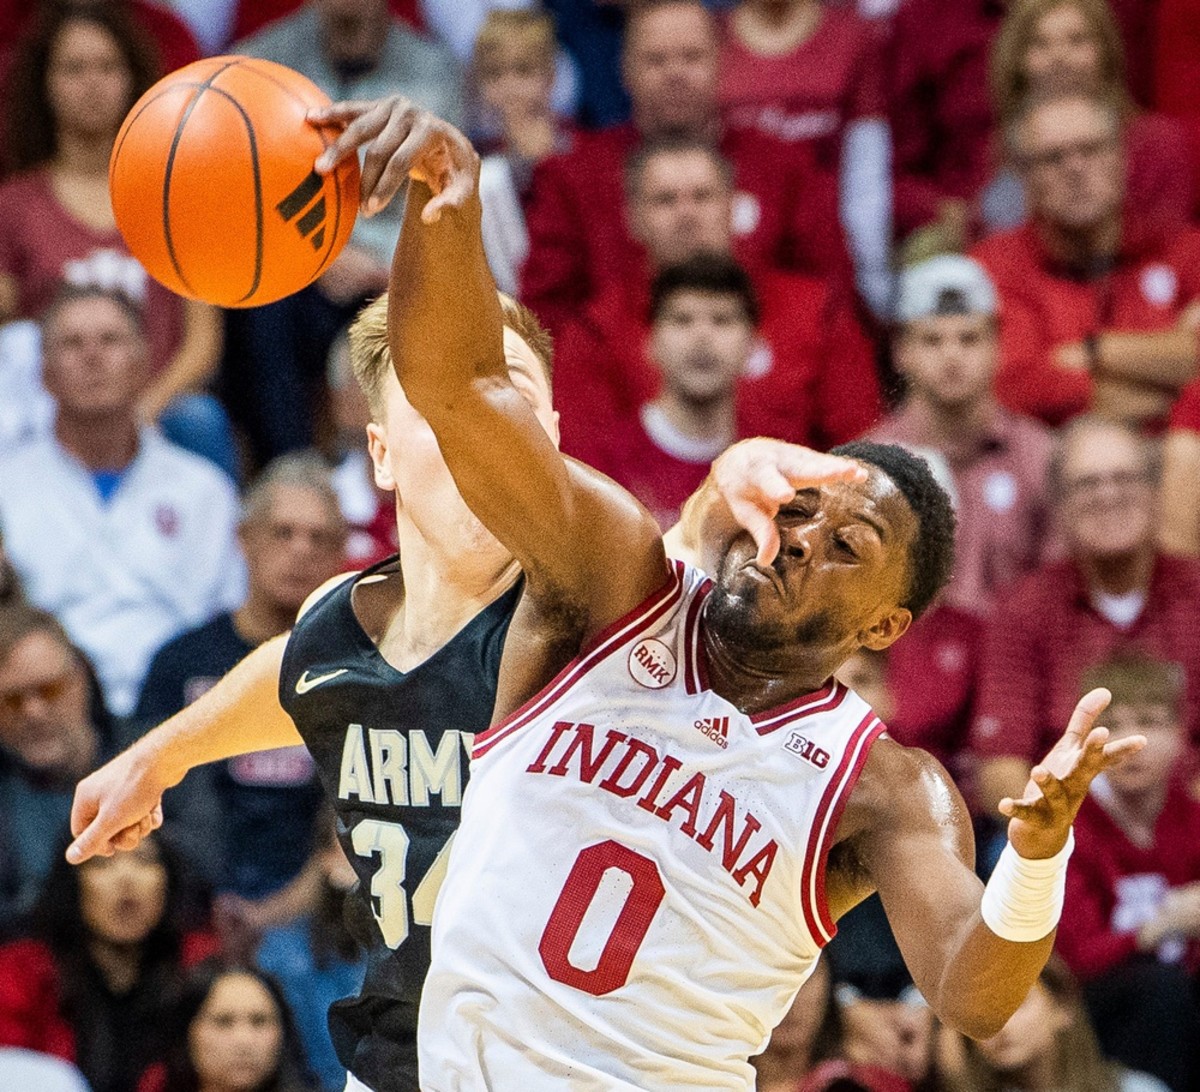 Indiana's Xavier Johnson (0) steals the ball from Army's Charlie Peterson (34) during the first half of the Indiana versus Army men's basketball game.